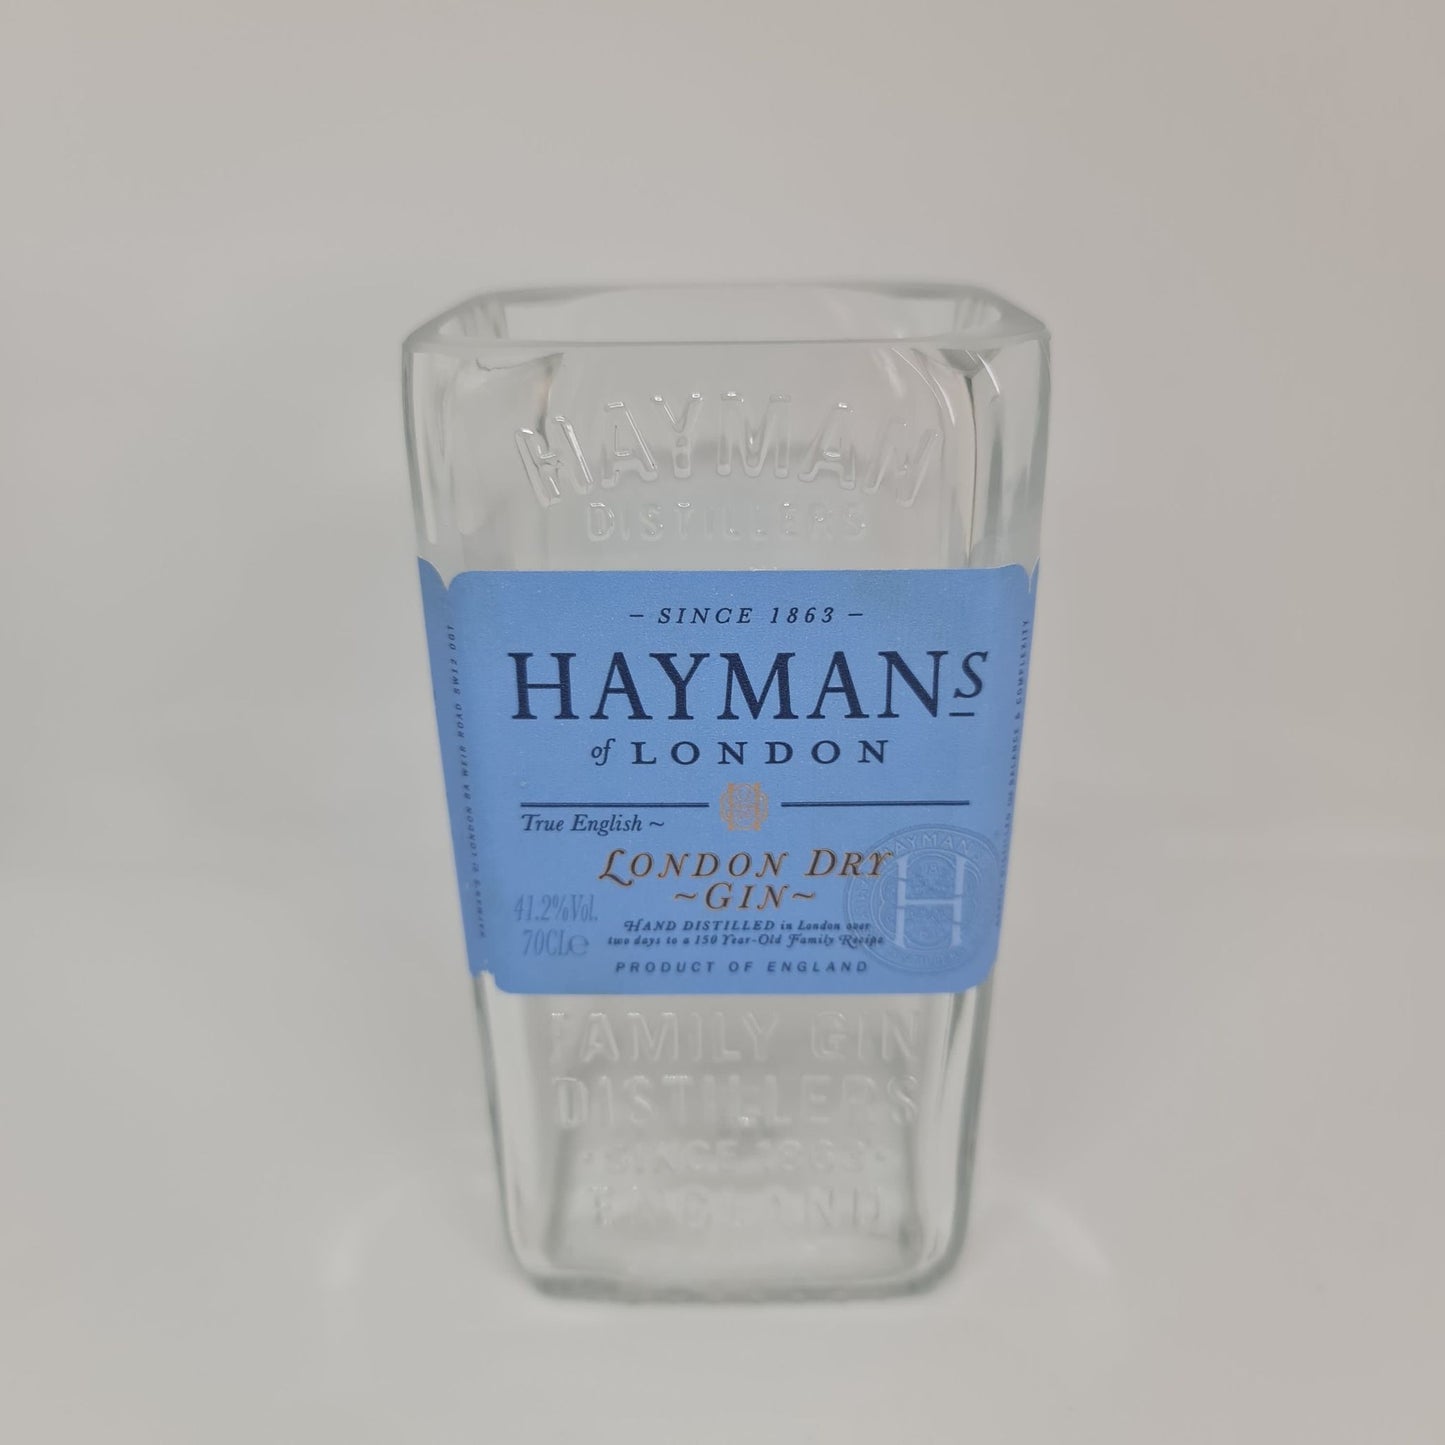 Hayman's London Dry Gin Bottle Candle